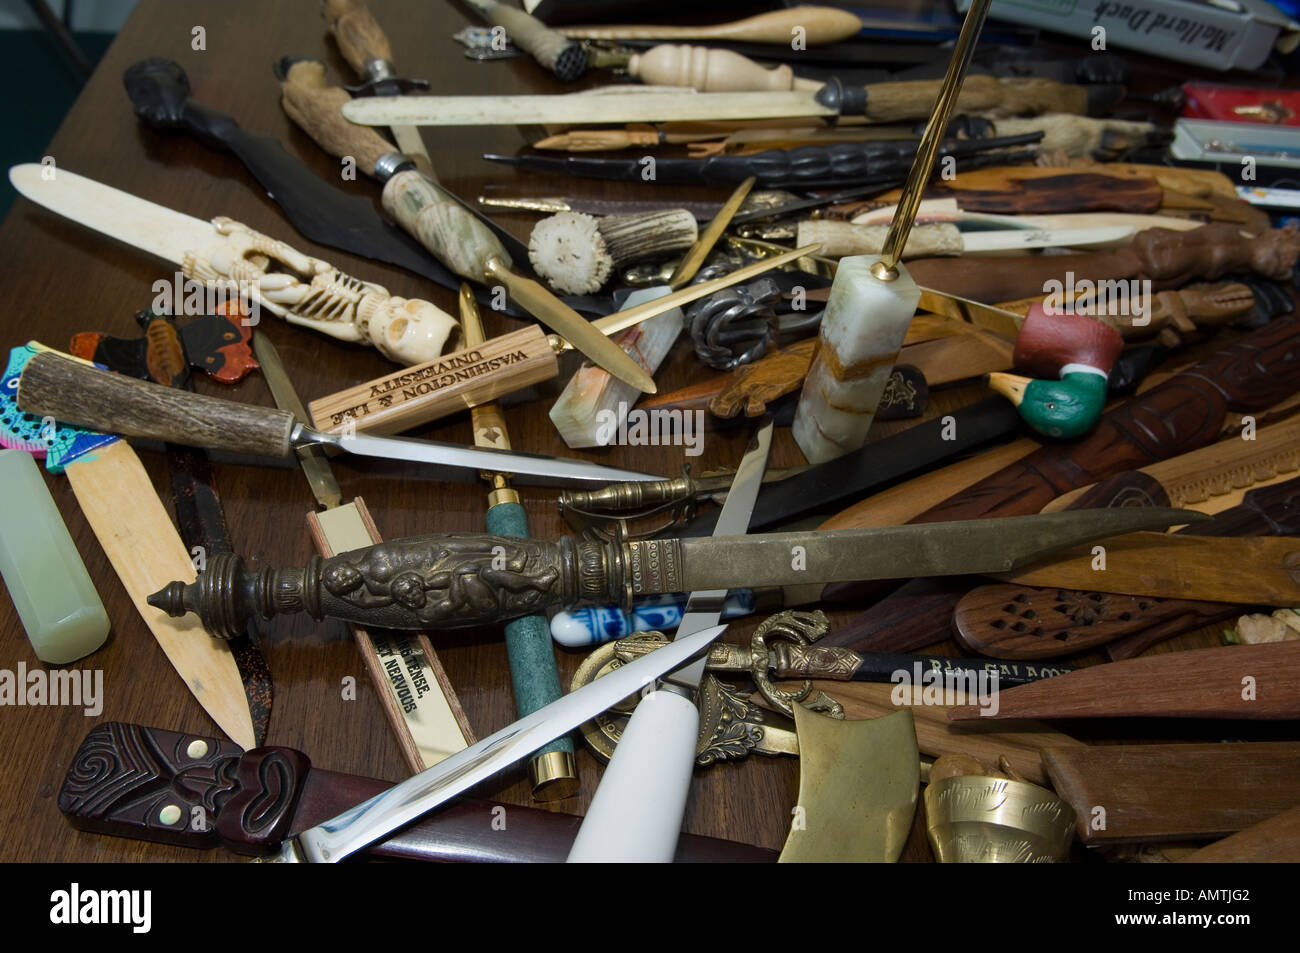 Knives and other illegal blade weapons Stock Photo